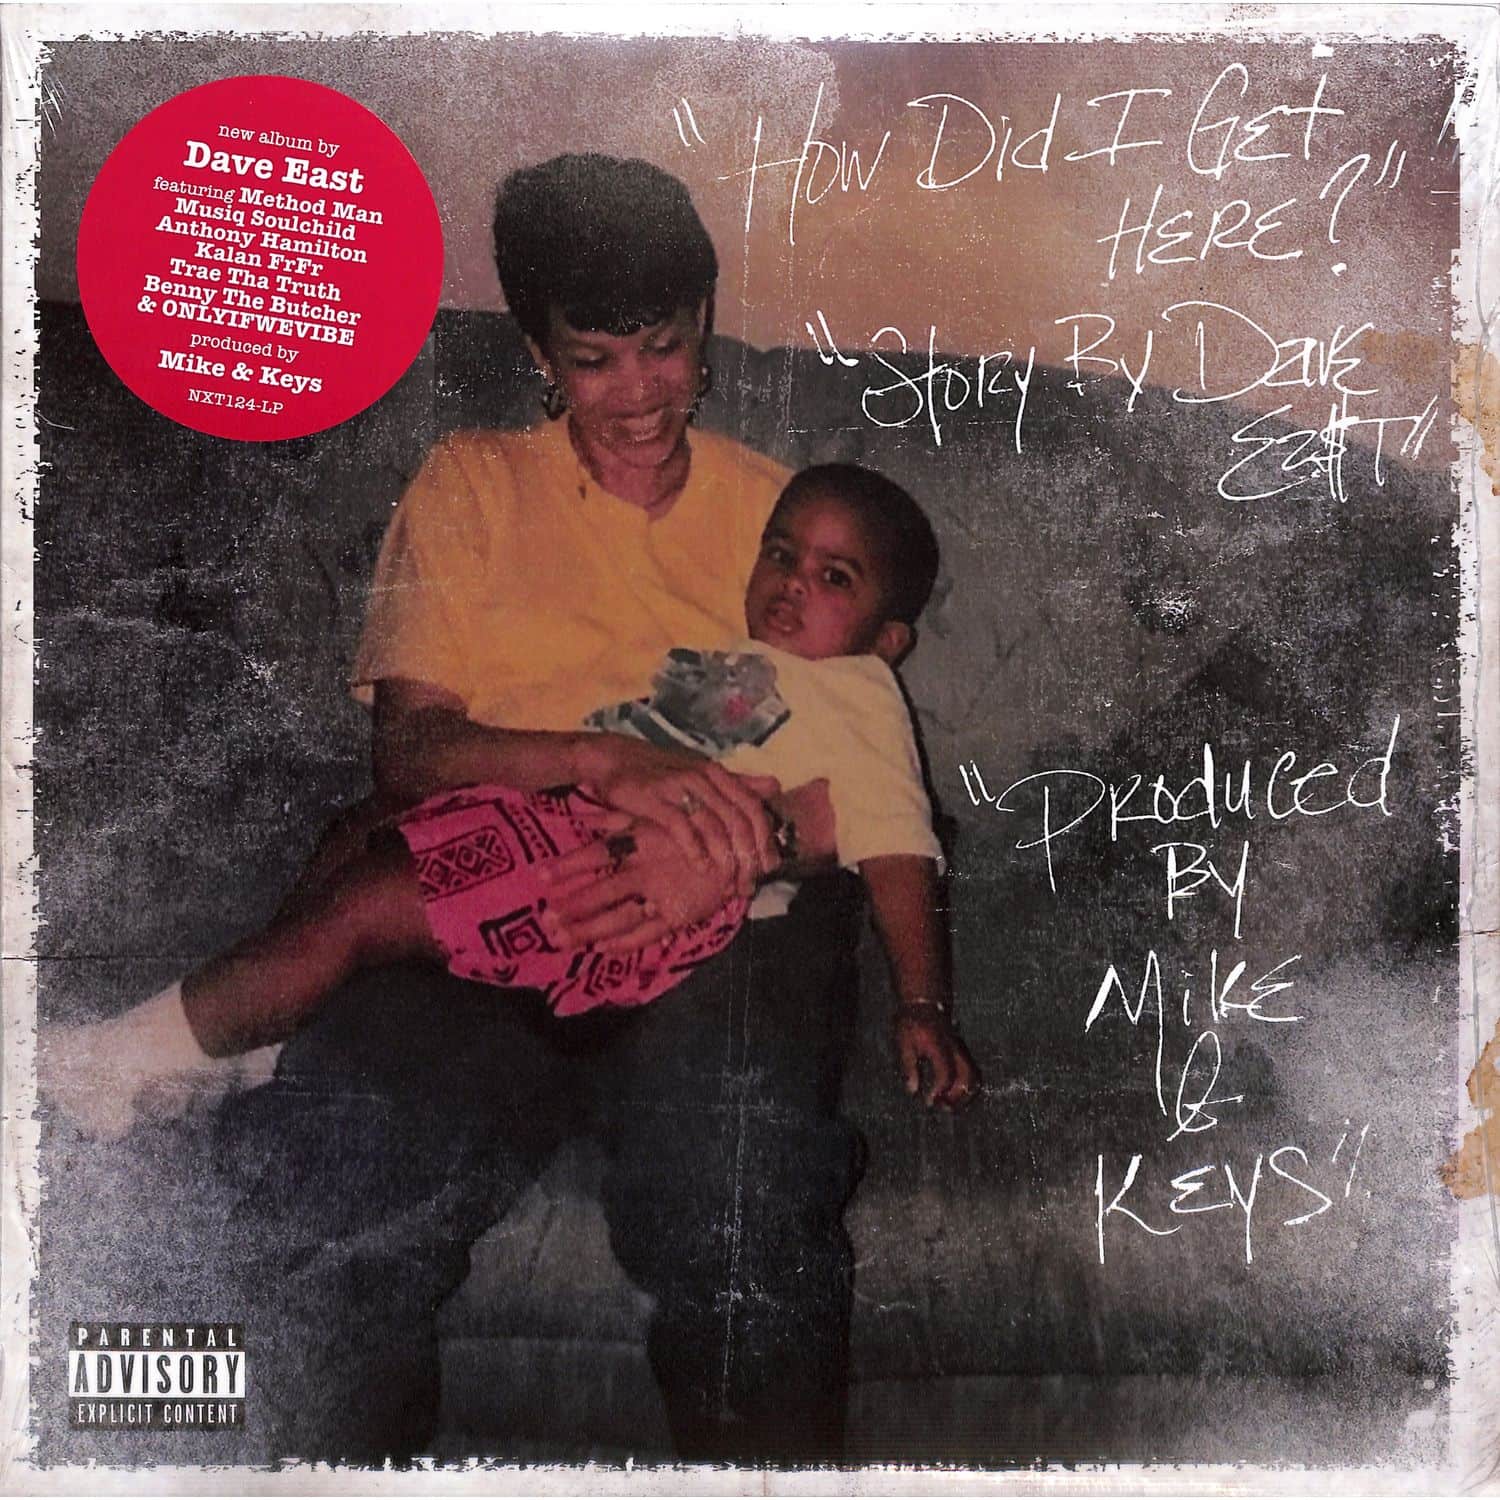 Dave East X Mike & Keys - HOW DID I GET HERE 